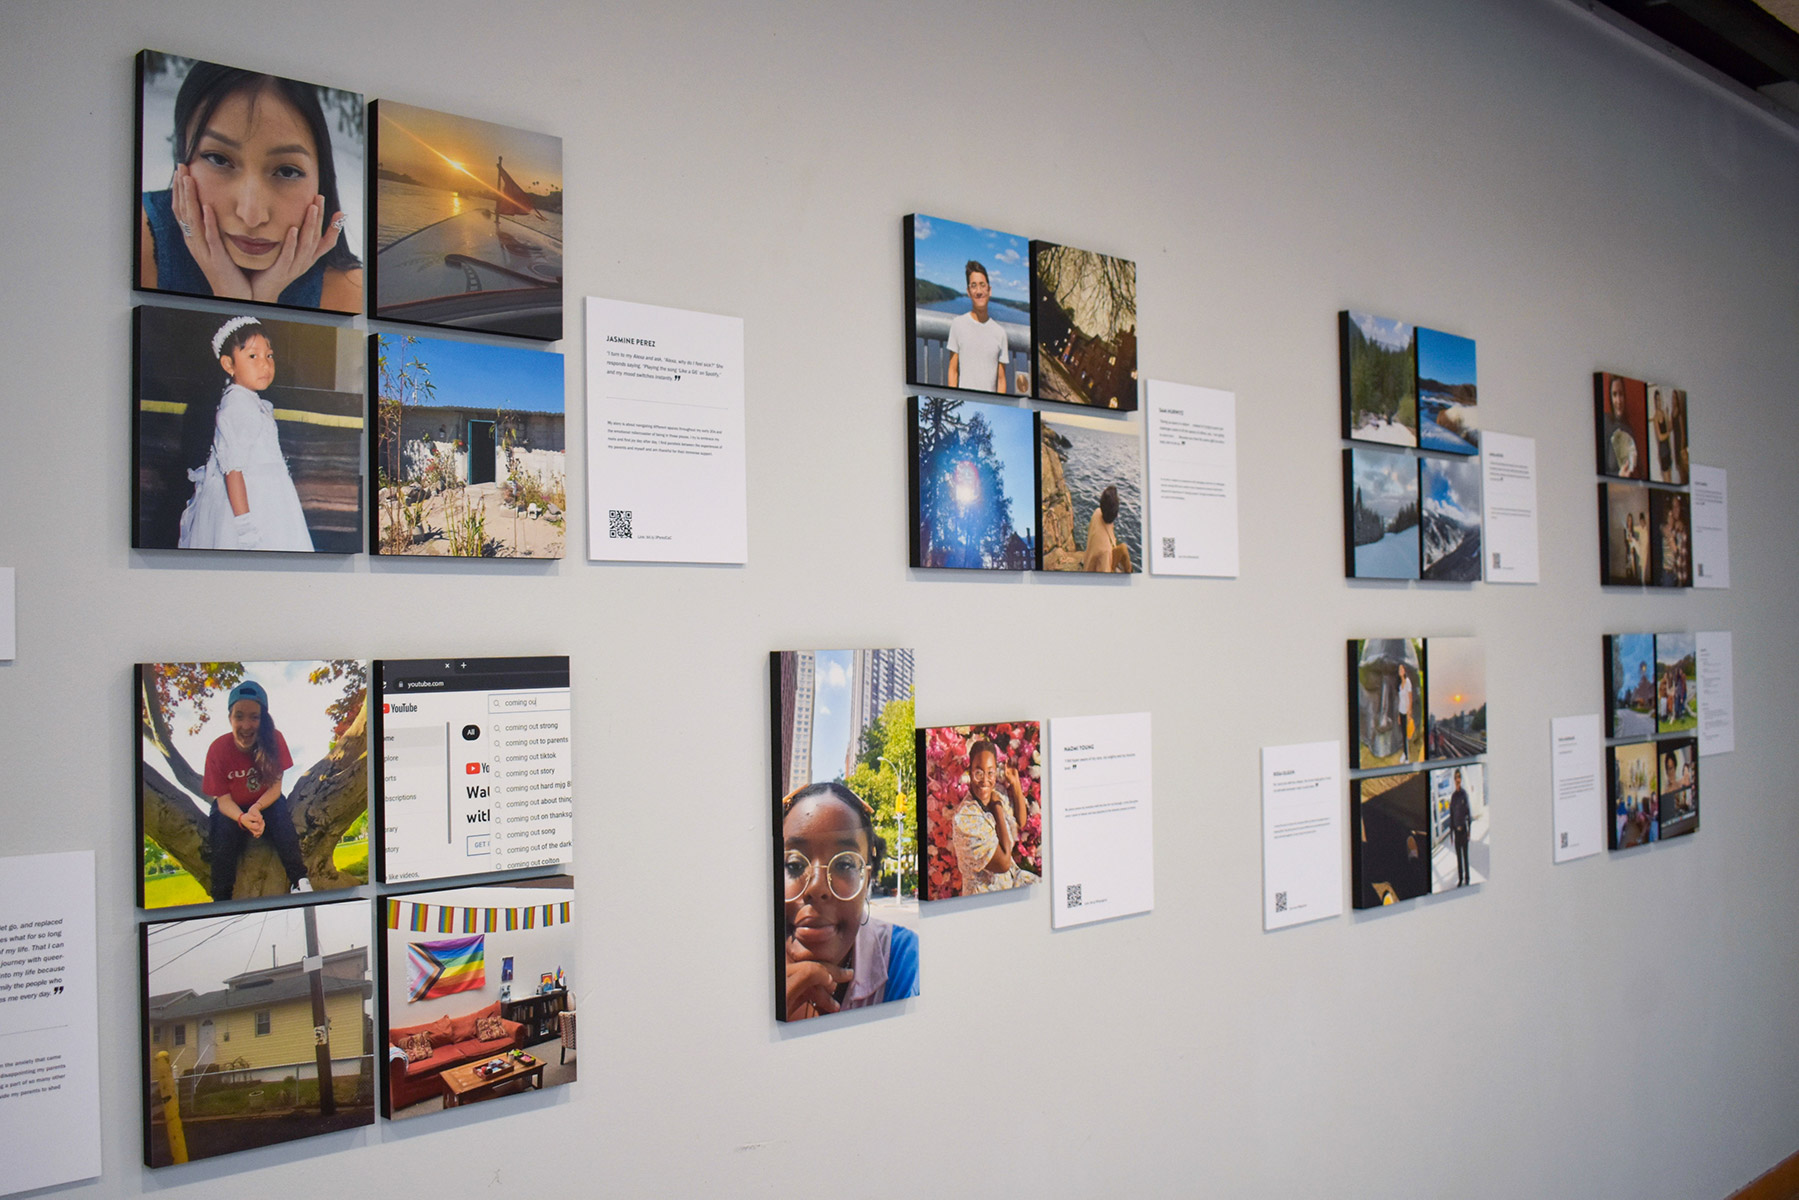 The exhibit employs QR codes to enable visitors to gain access to each student’s story.